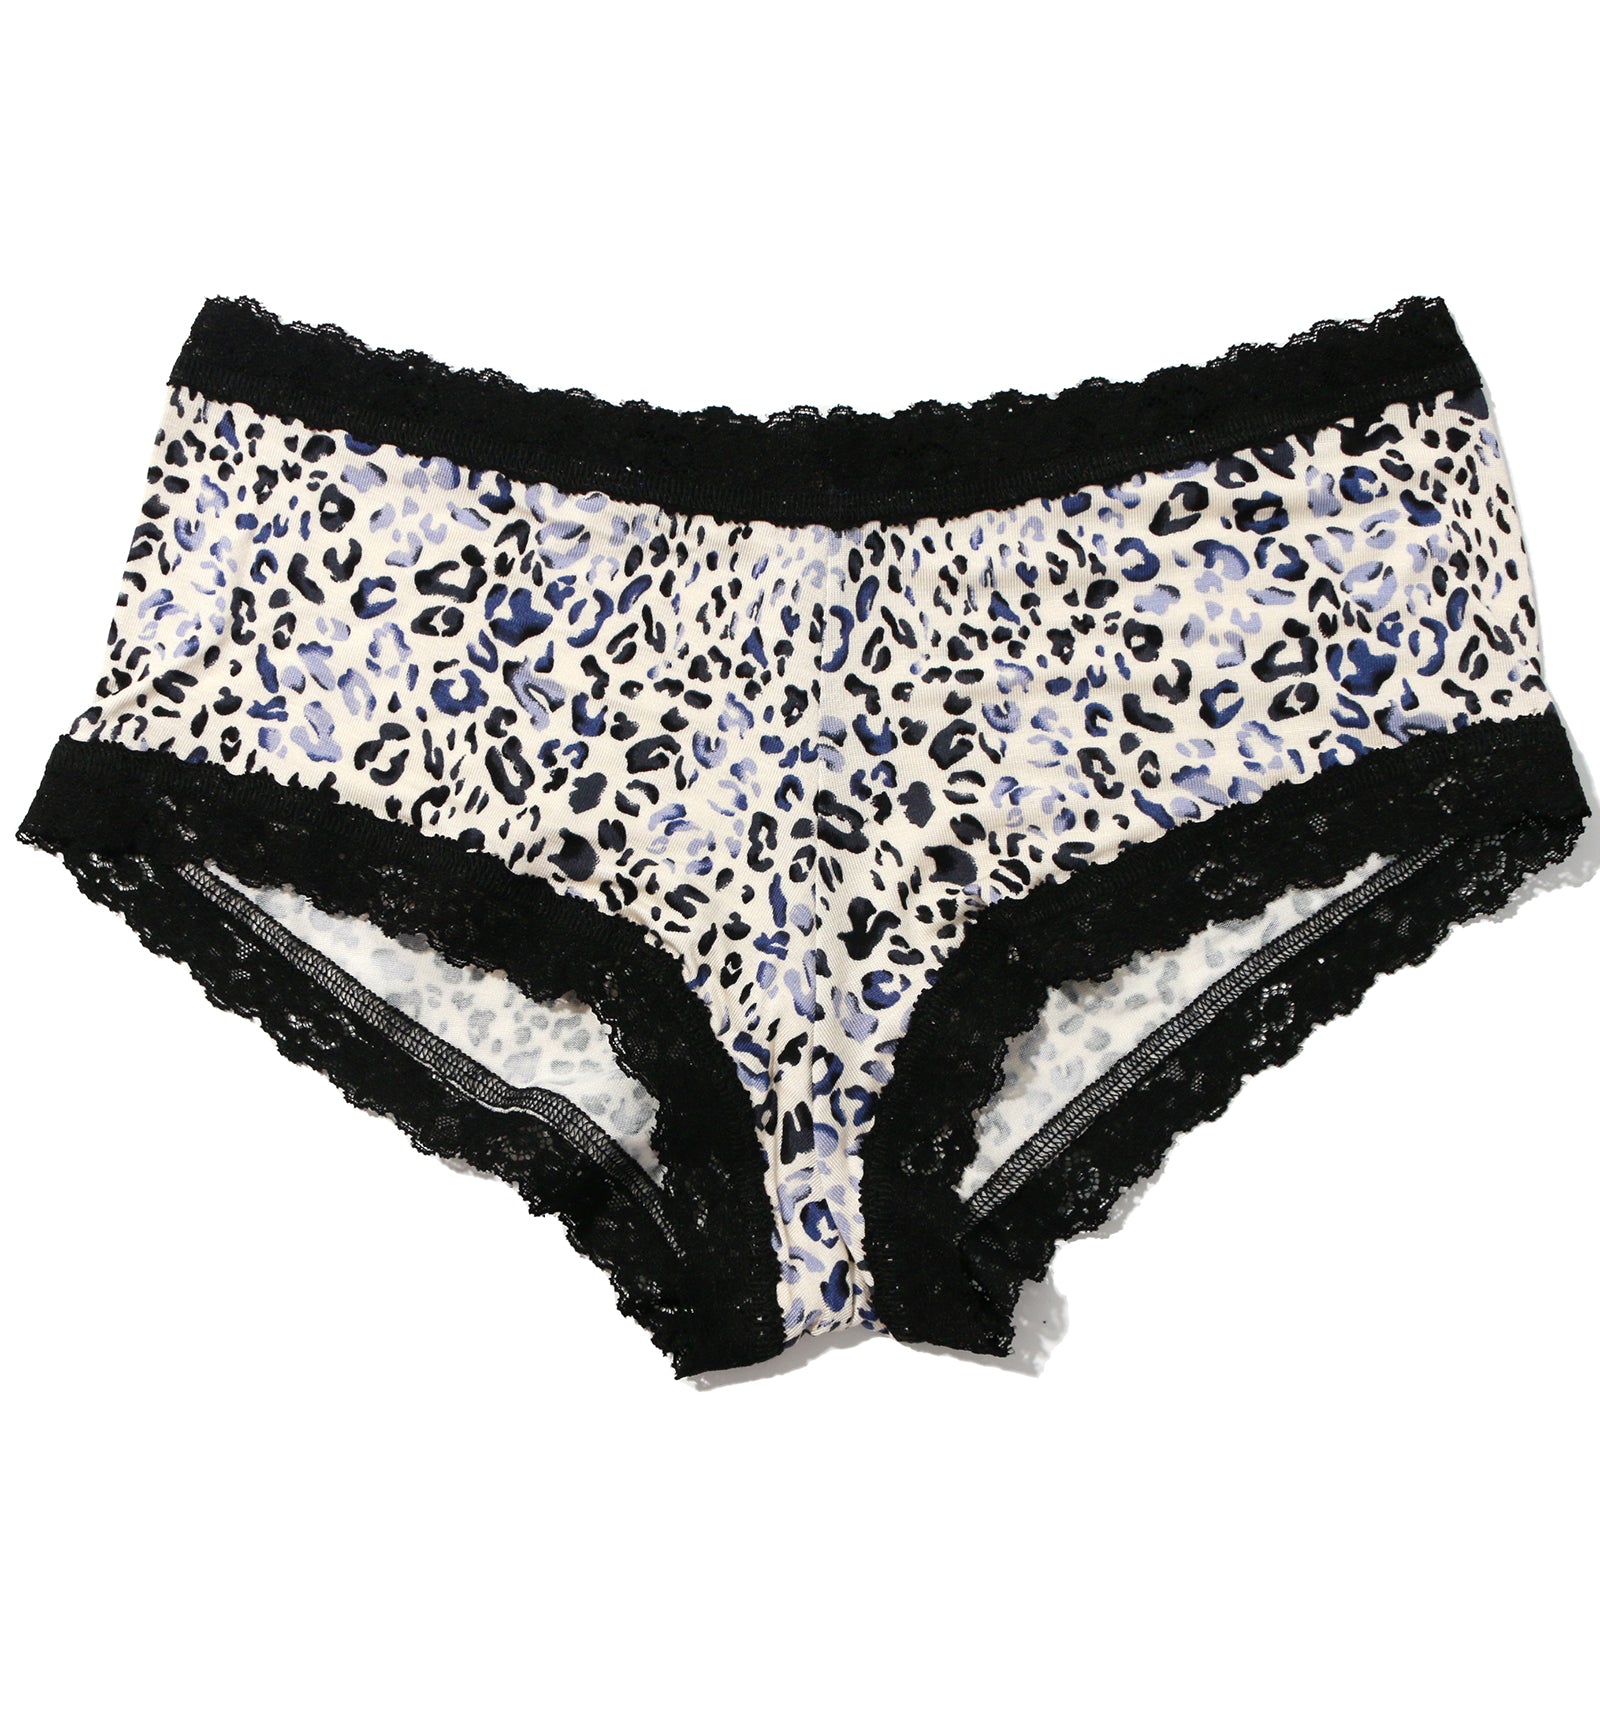 Hanky Panky Dream Printed Boyshort (PR681274),XS,Spotted - Spotted,XS